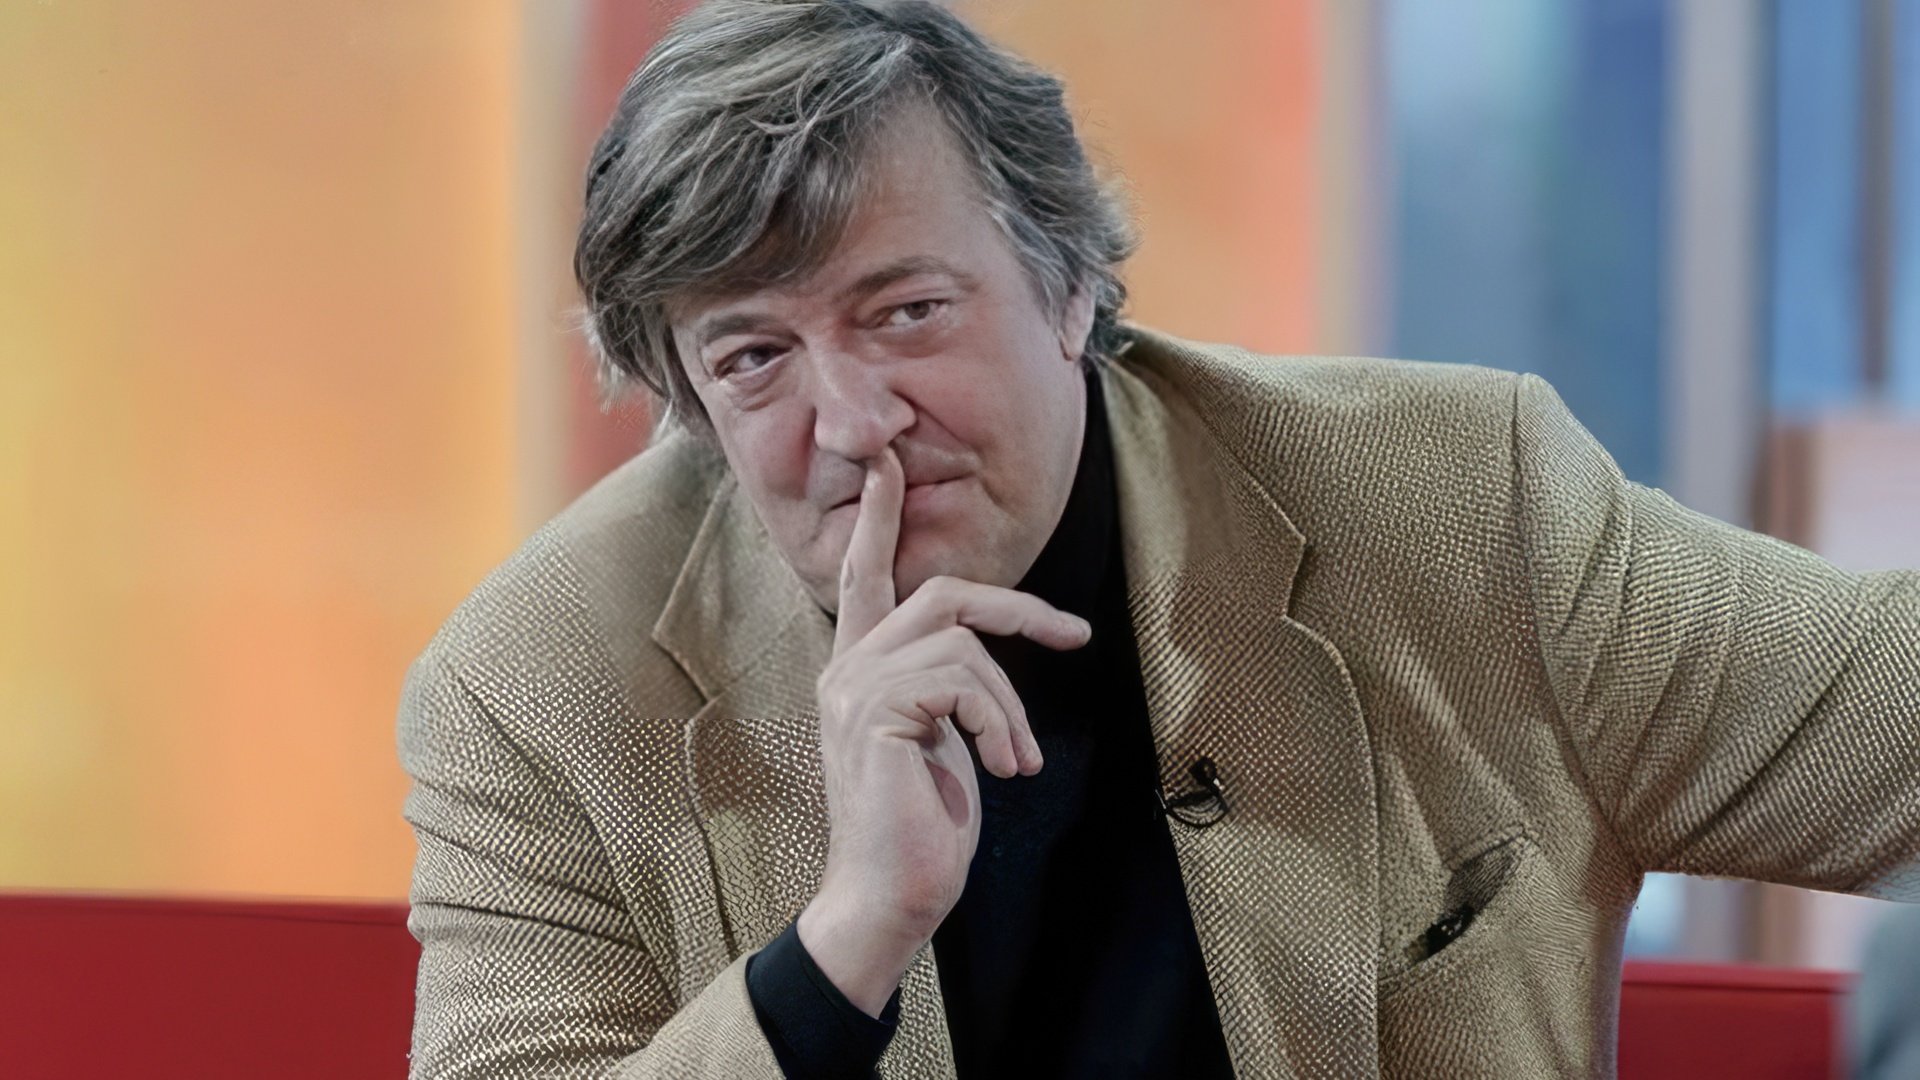 Stephen Fry does not keep his sexual orientation back